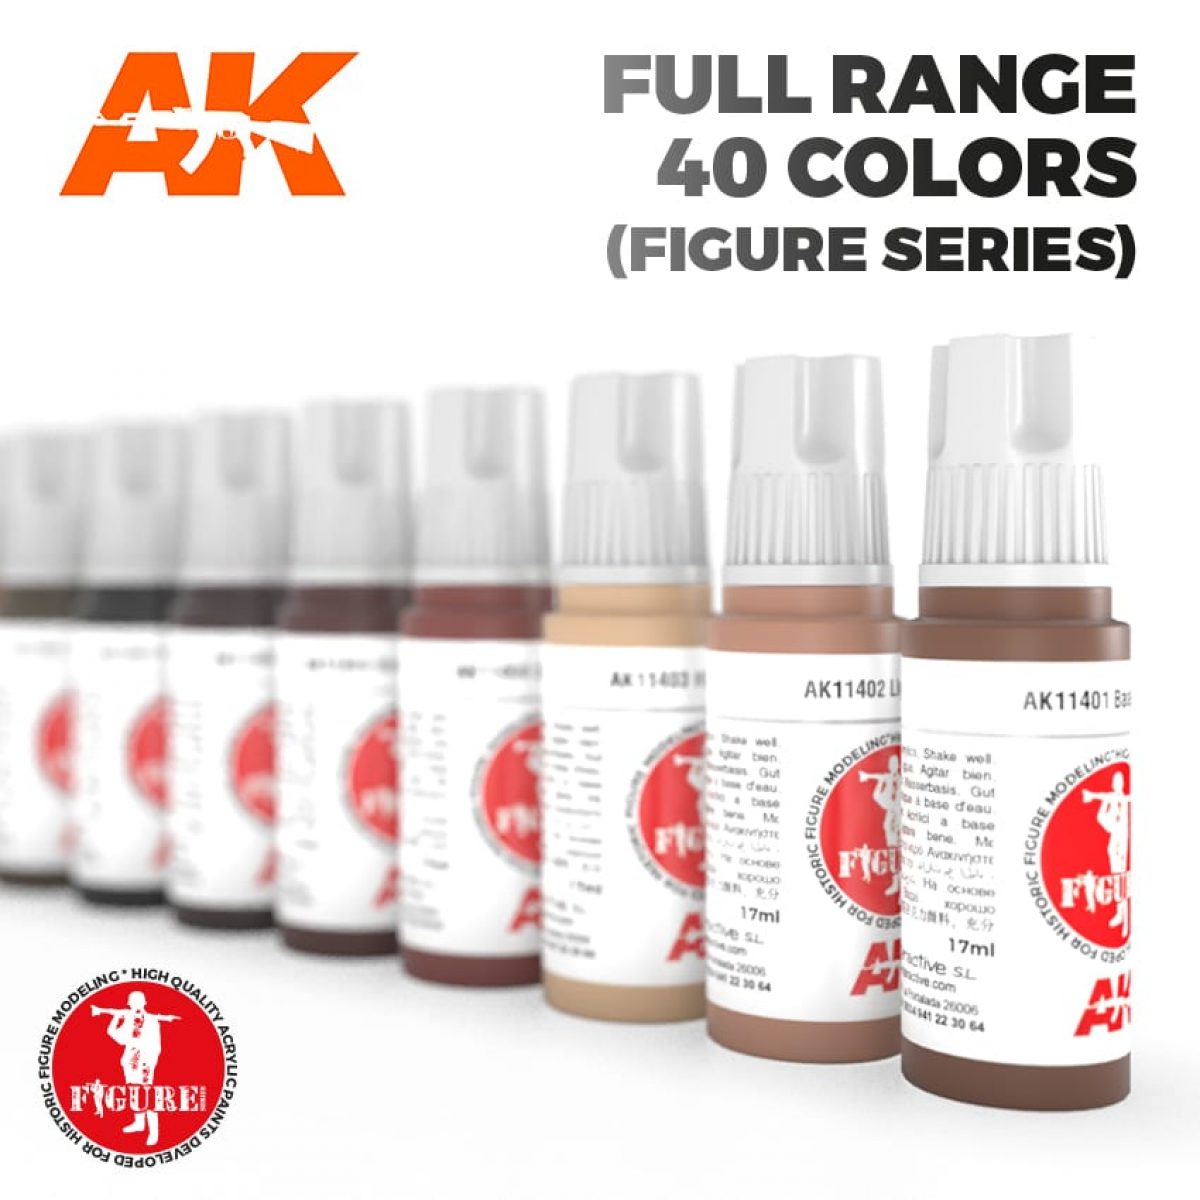 6 Paints Ak Interactive 3rd Generation Acrylic Paint Sets Choose from Range